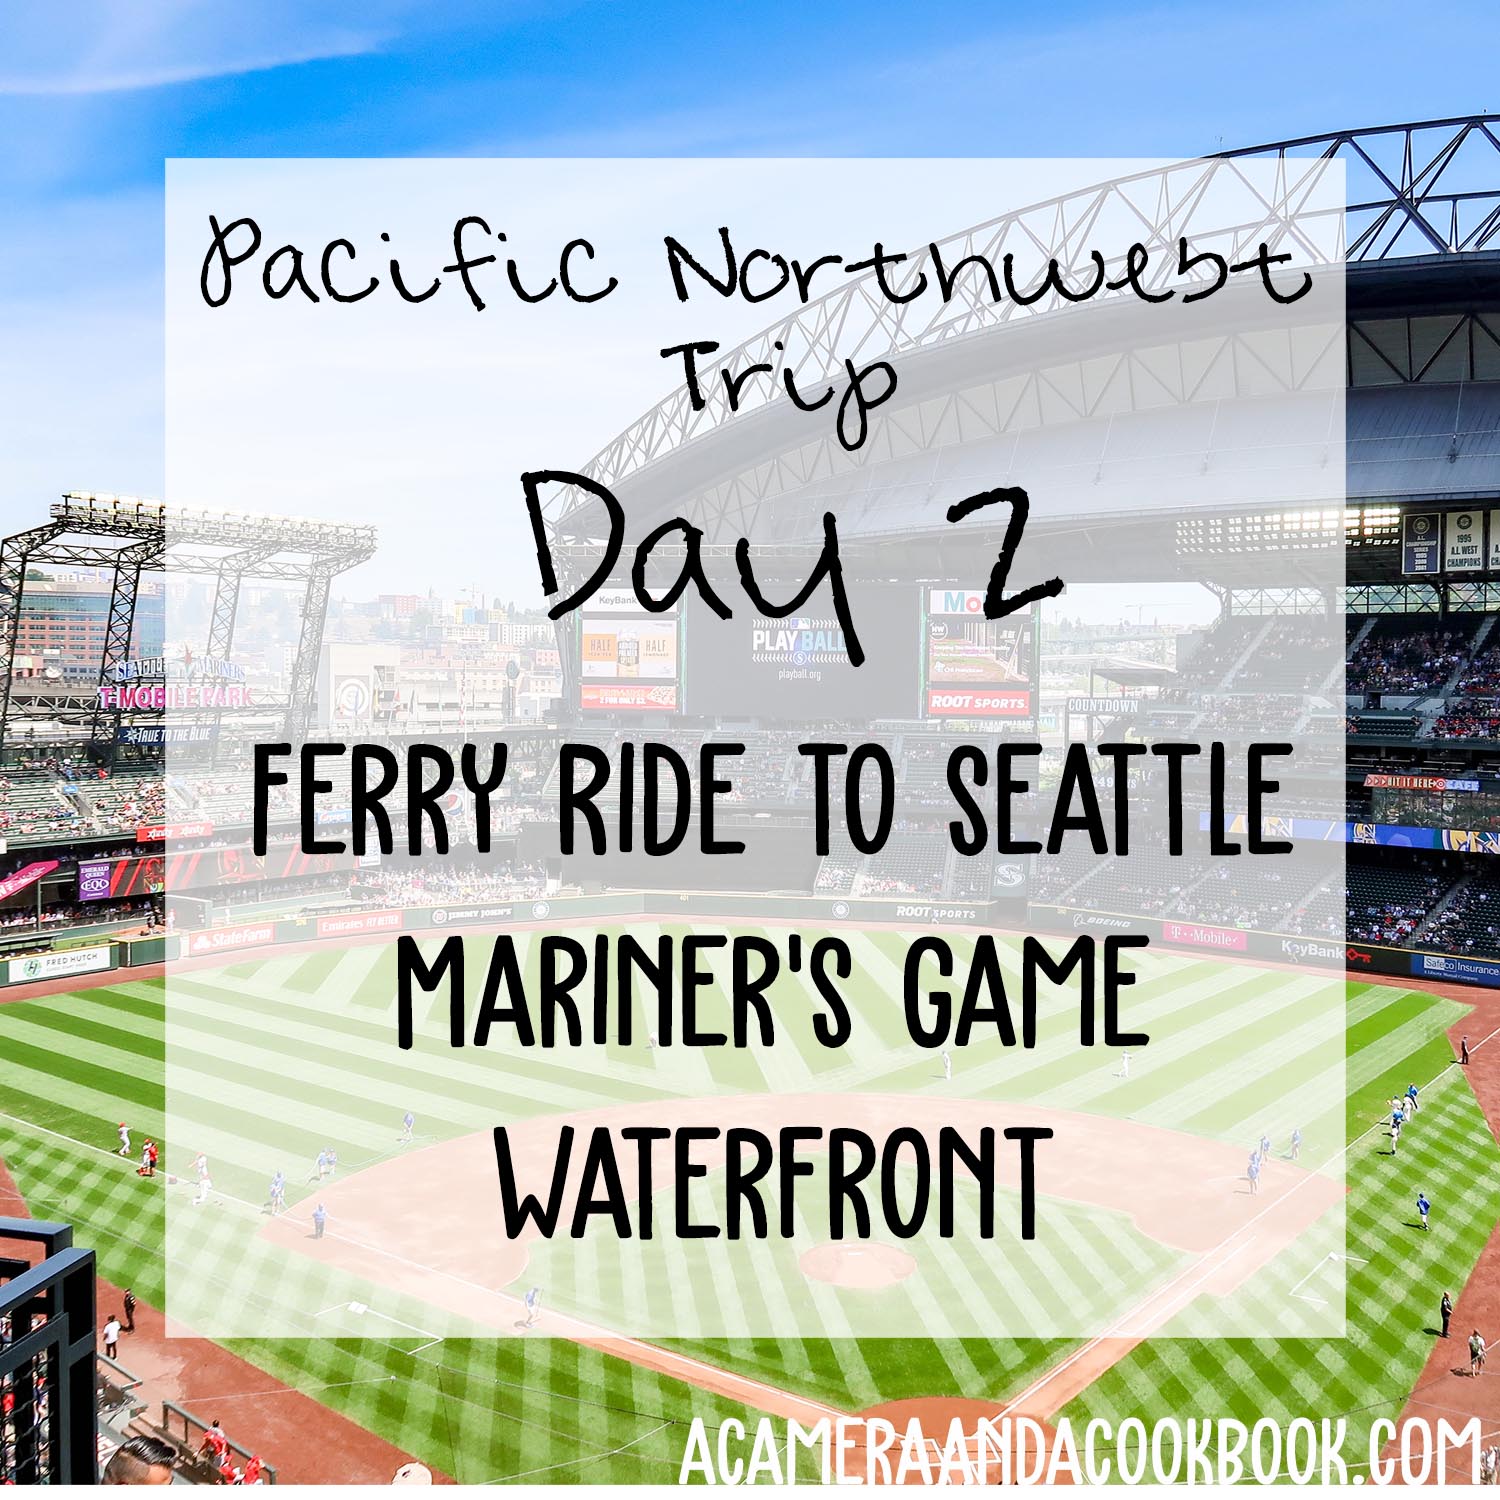 Pacific NW Trip: Day 2